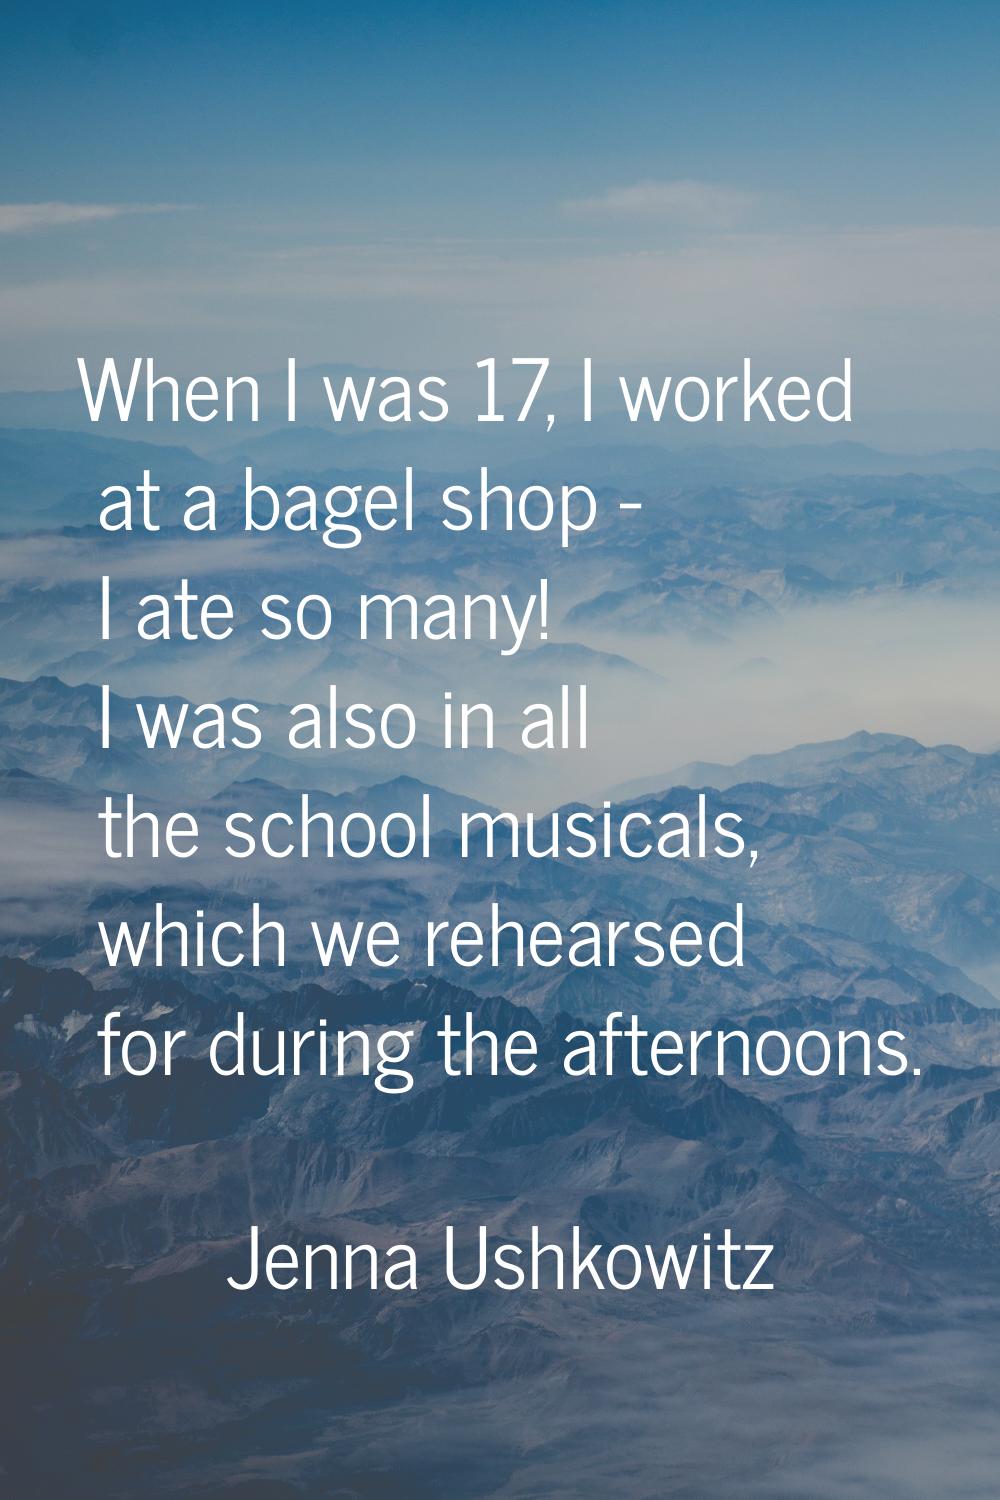 When I was 17, I worked at a bagel shop - I ate so many! I was also in all the school musicals, whi